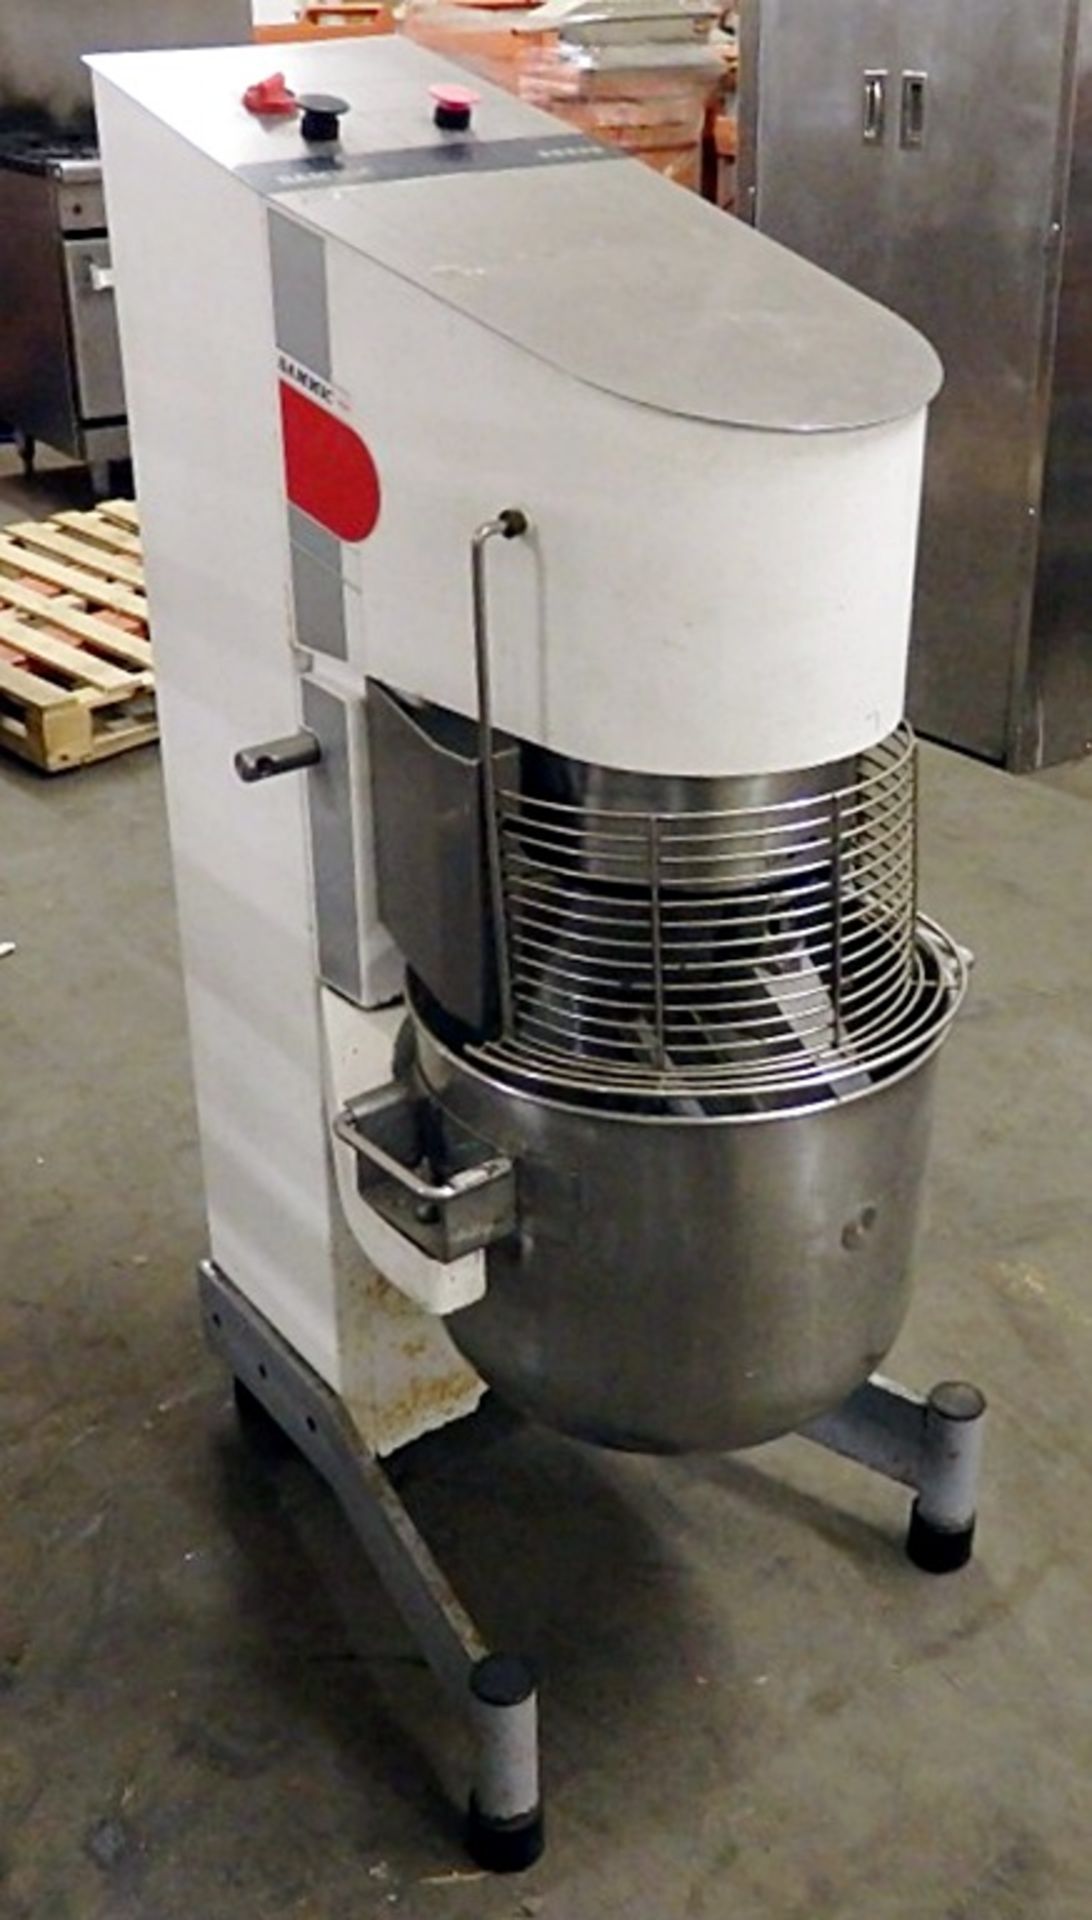 1 x Sammic Planetary Mixer With Whisk, Hook, Paddle - Presented in Good Condition - Dimensions: W54